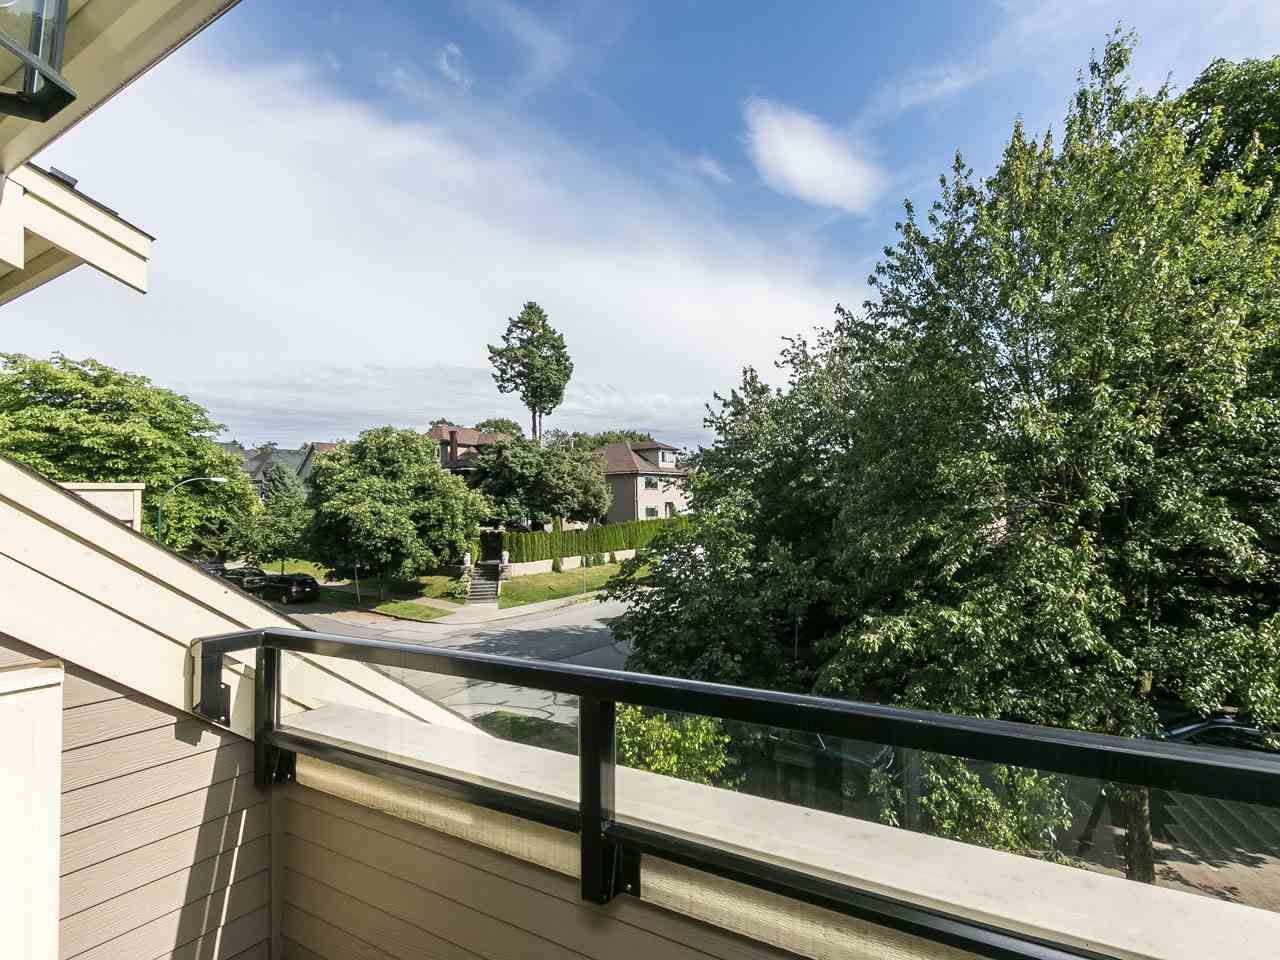 Photo 18: Photos: 1785 NAPIER STREET in Vancouver: Grandview VE Townhouse for sale (Vancouver East)  : MLS®# R2079454